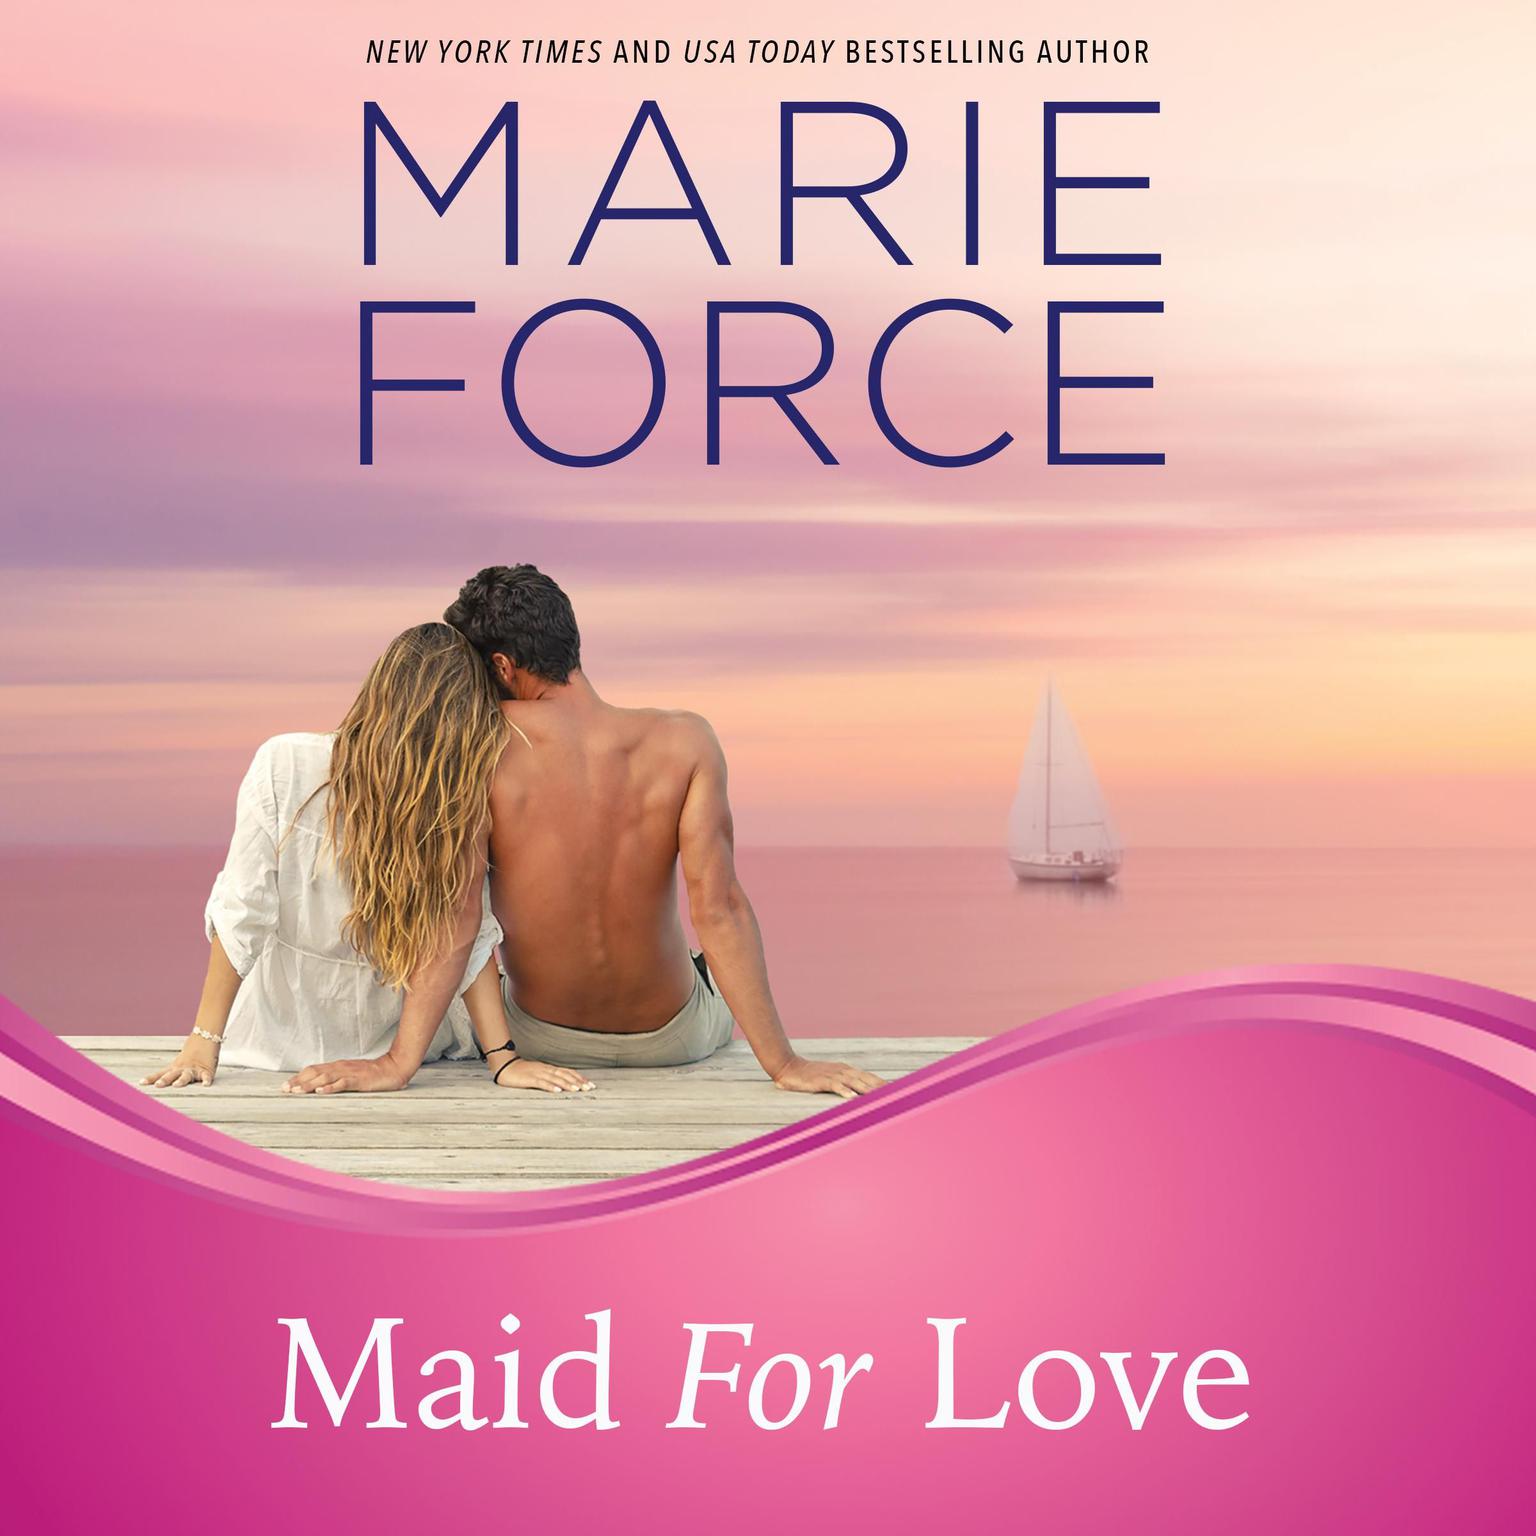 Maid for Love Audiobook, by Marie Force